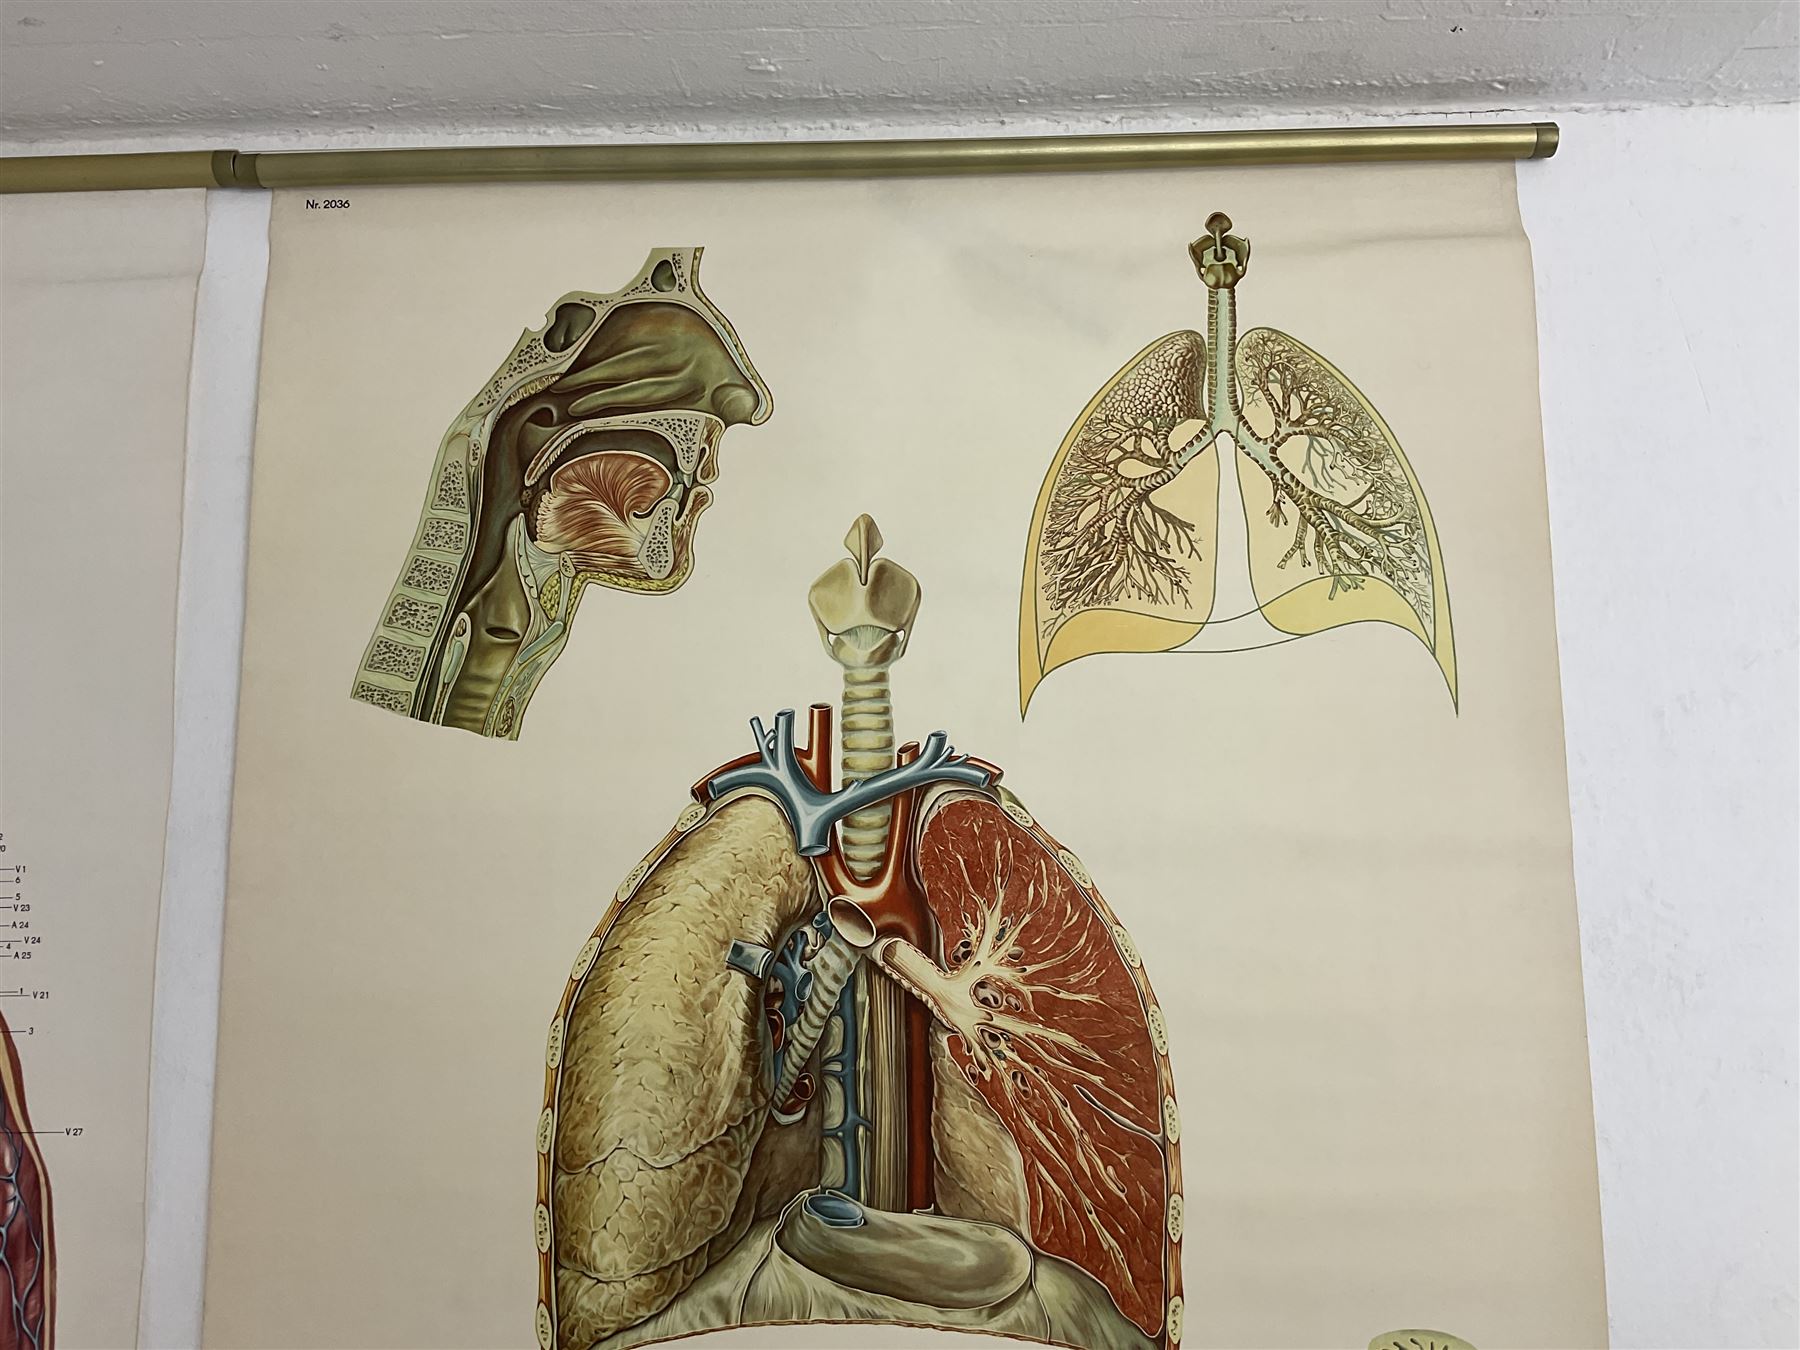 Four Dutch educational wall hangings published by The Deutsches Hygiene Museum - Image 19 of 33